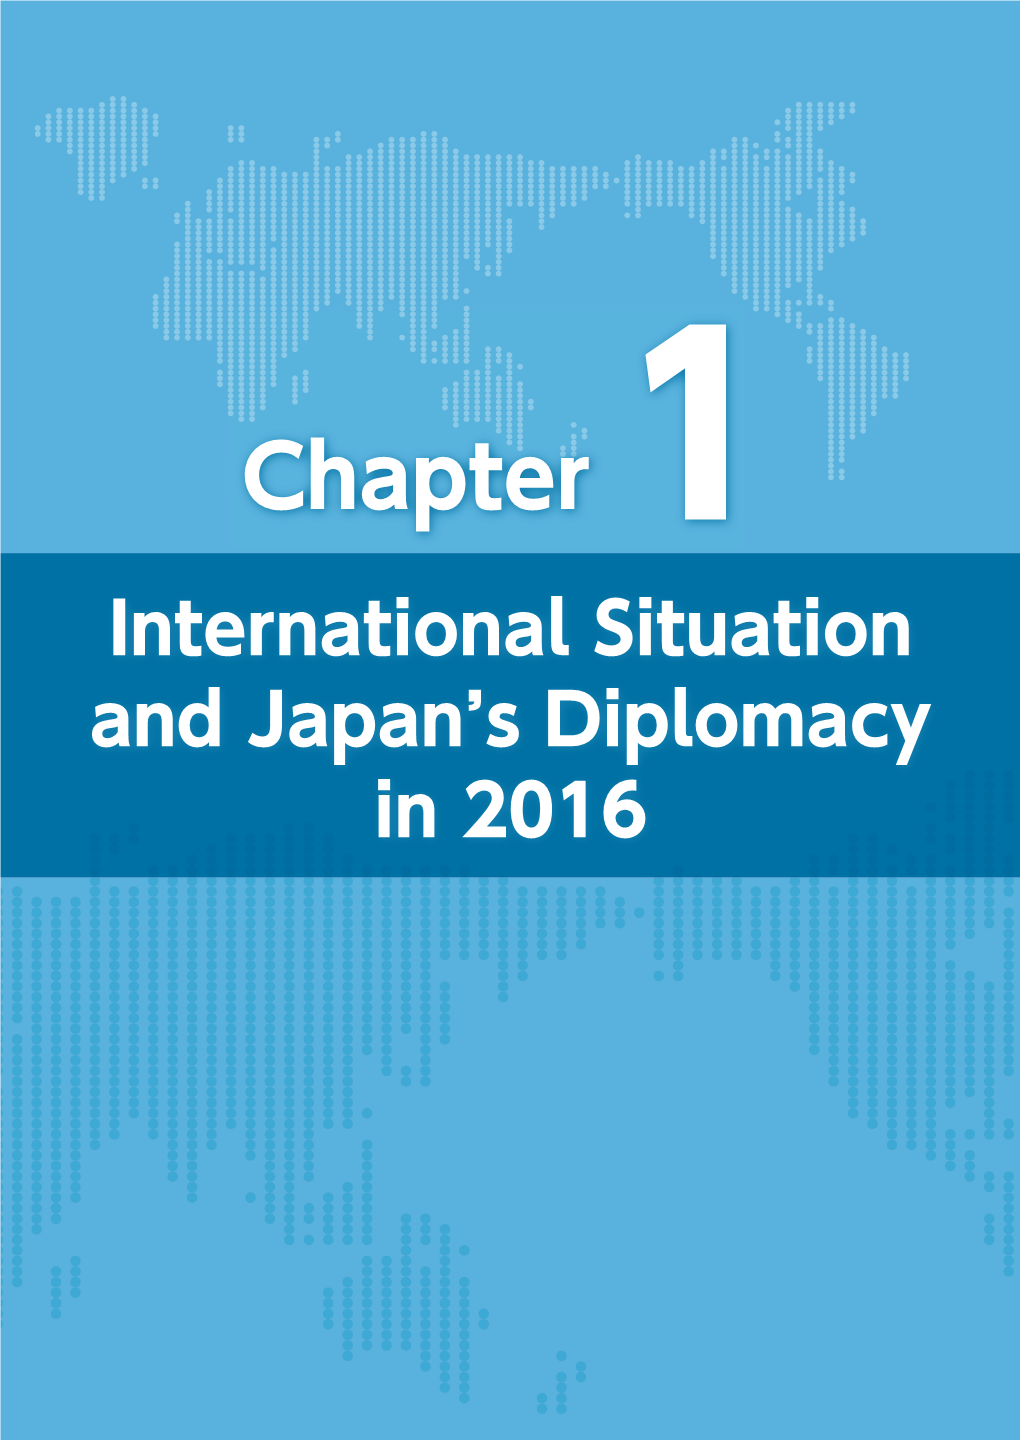 Chapter 1 International Situation and Japan's Diplomacy in 2016